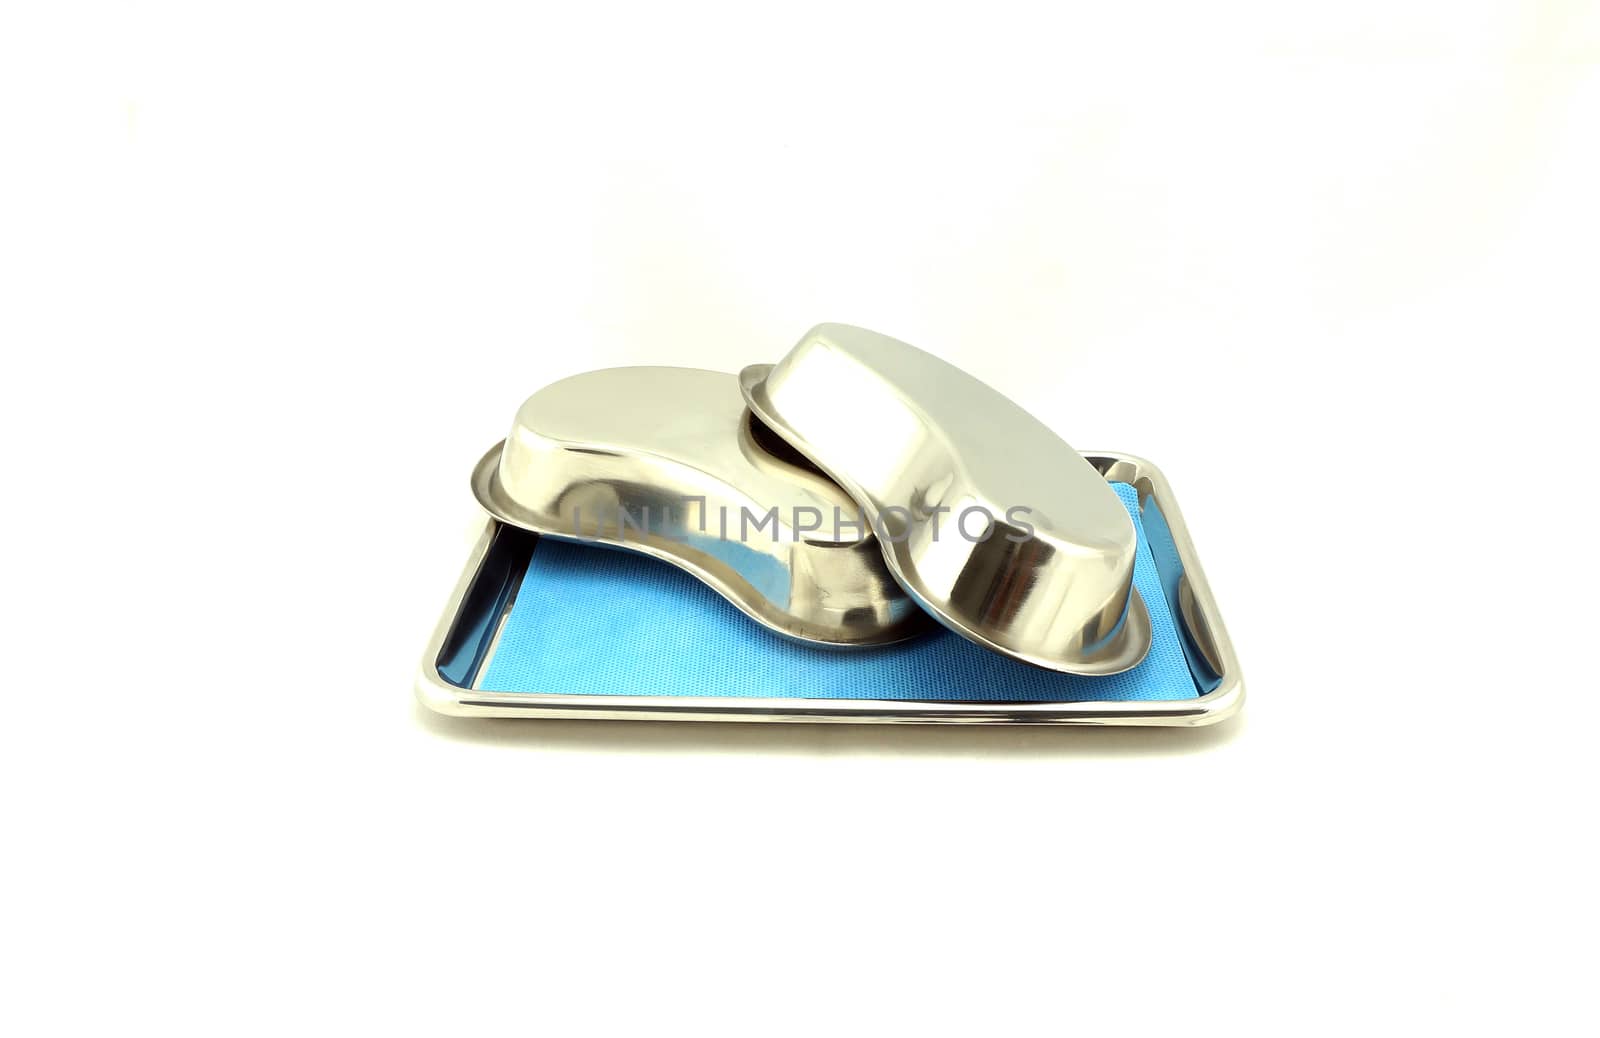 Two emesis basin or kidney bowl, stainless steel, placed in tray.                              